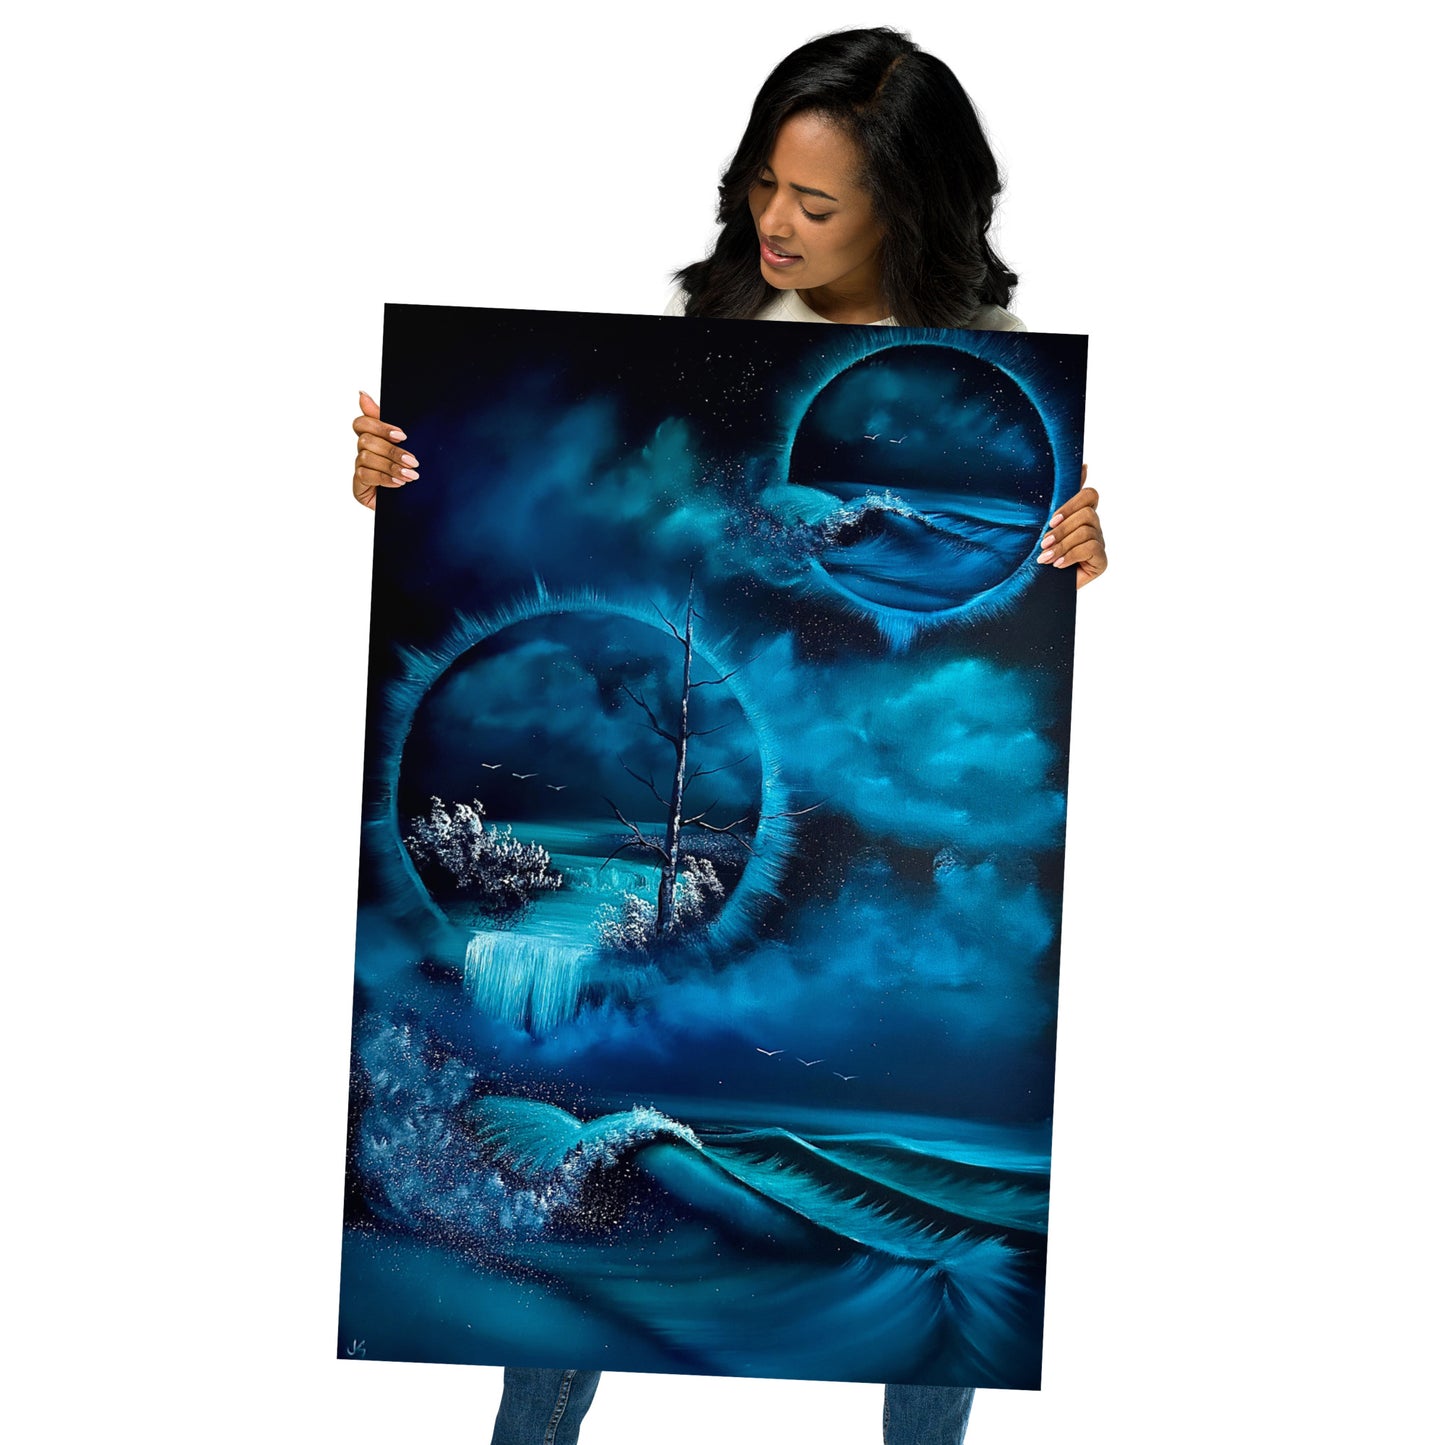 Poster Print - Aquatic Dreamscape - Surrealism Double Portal Waterfall Seascape by PaintwithJosh